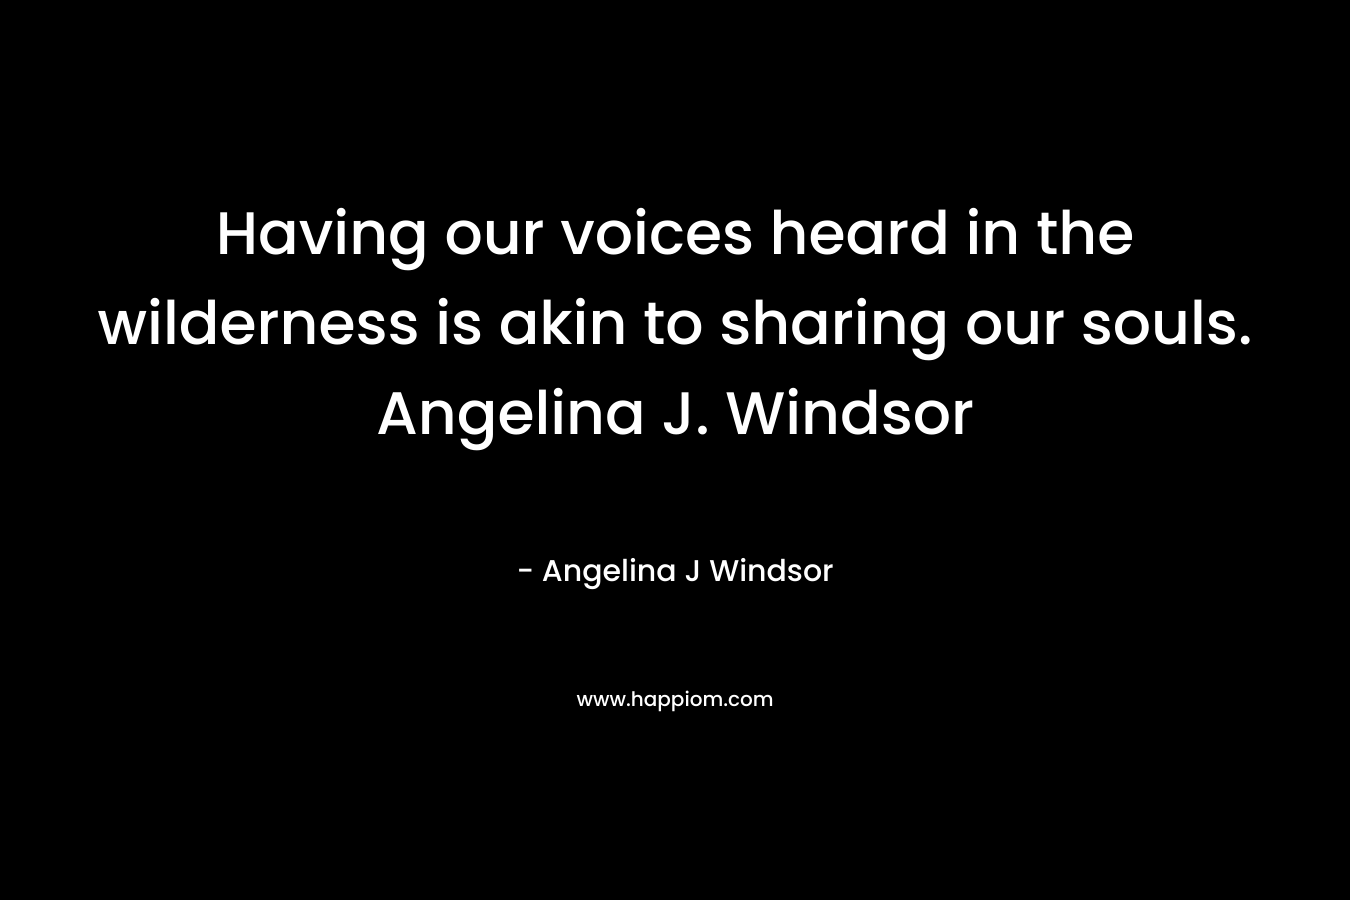 Having our voices heard in the wilderness is akin to sharing our souls. Angelina J. Windsor